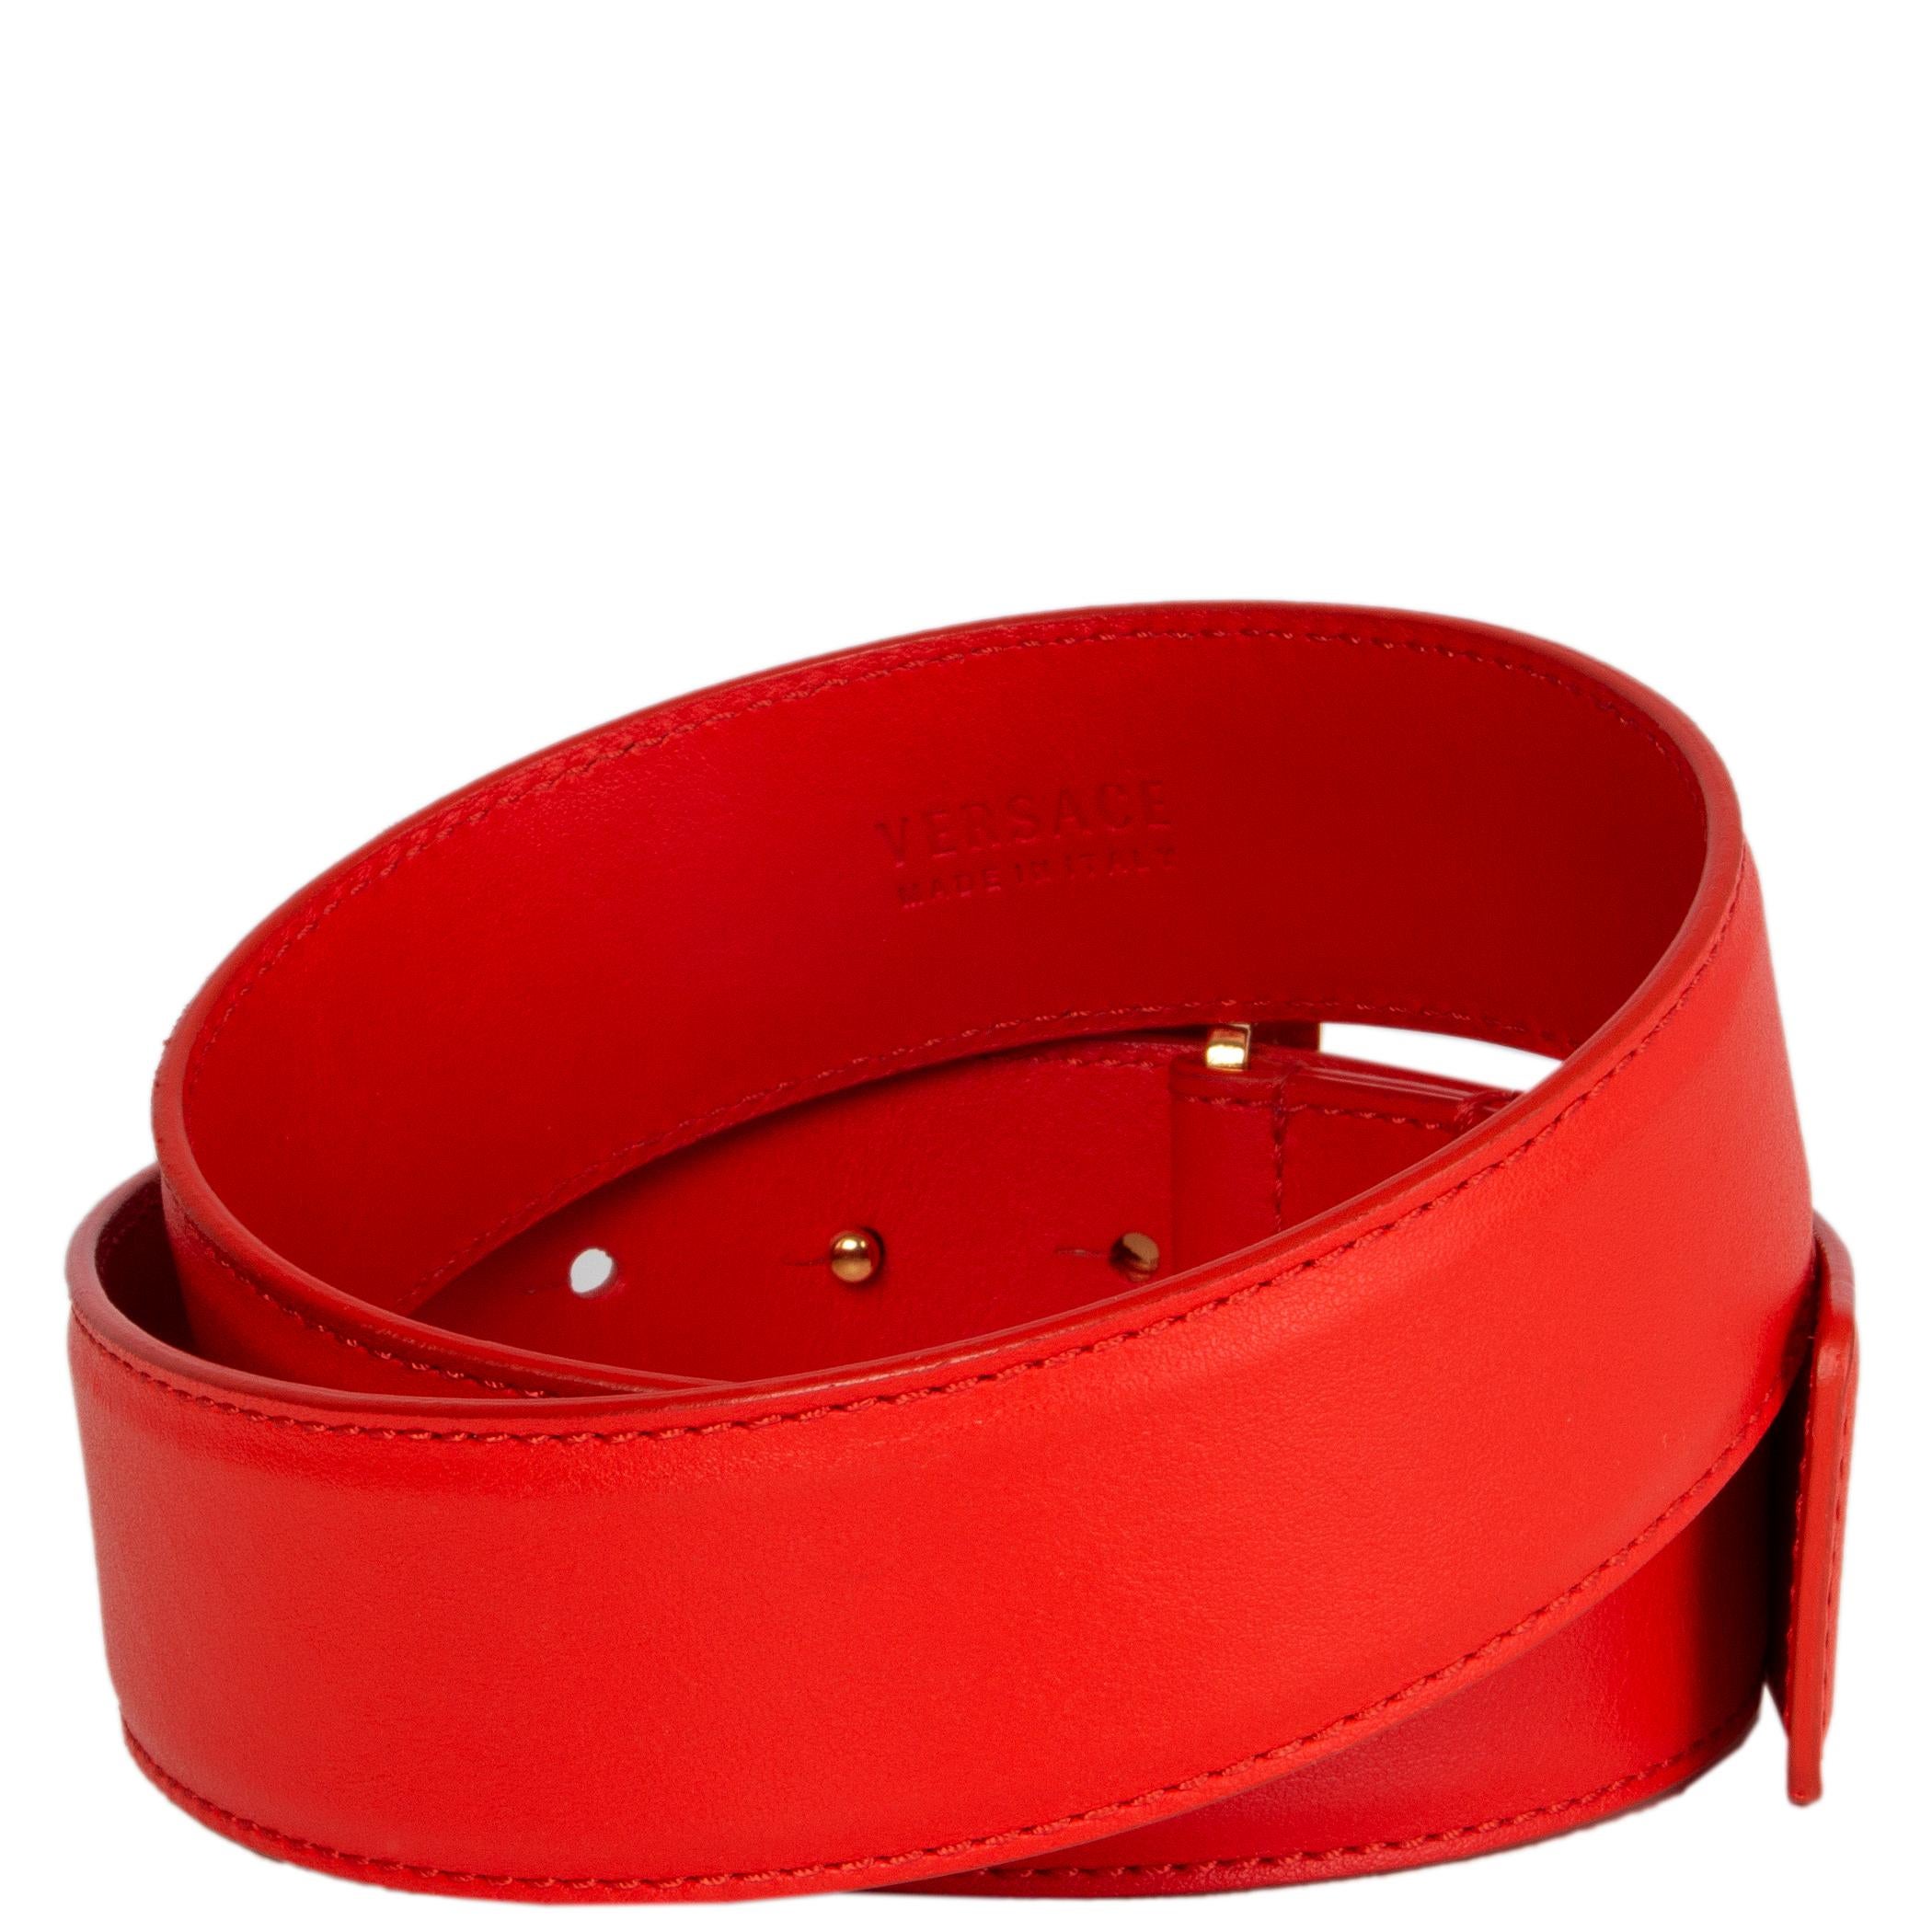 Versace belt in coral red calfskin with a square gold-tone medusa metal buckle. Has been worn and is in excellent condition. 

Tag Size 75
Width 4cm (1.6in)
Fits 70cm (27.3in) to 80cm (31.2in)
Length 91cm (35.5in)
Buckle Size Height 5cm (2in)
Buckle